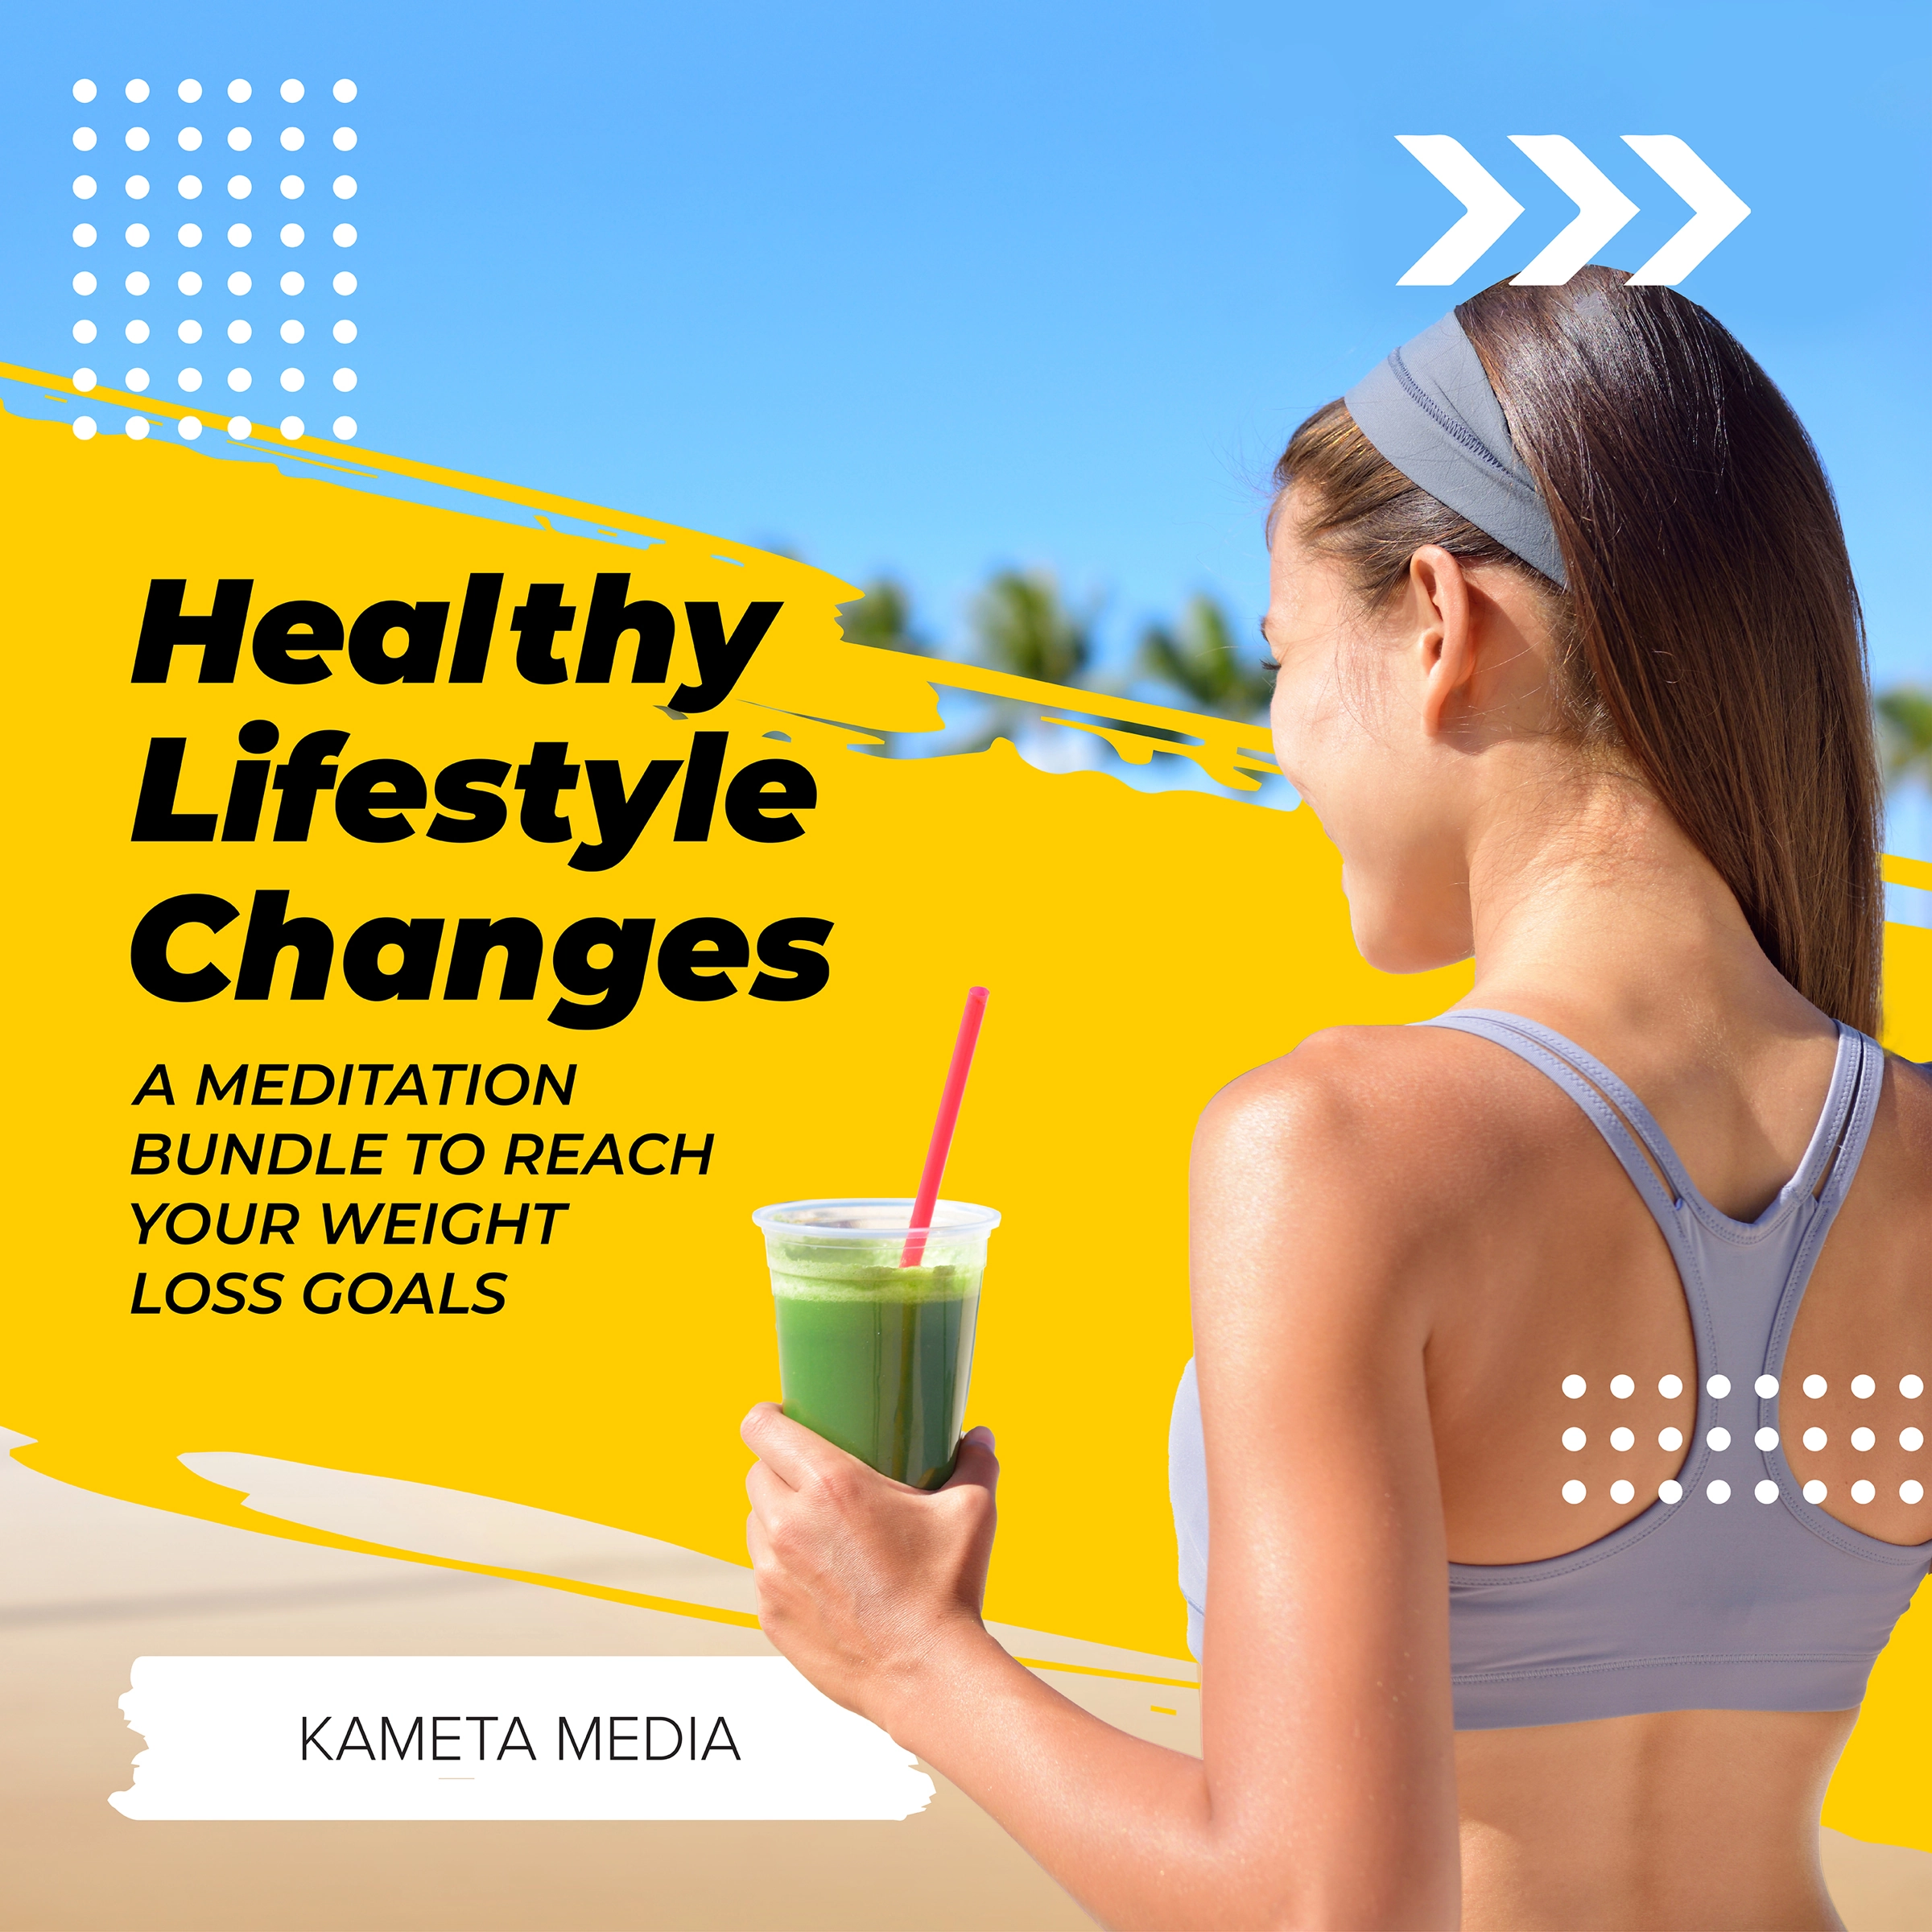 Healthy Lifestyle Changes: A Meditation Bundle to Reach Your Weight Loss Goals Audiobook by Kameta Media